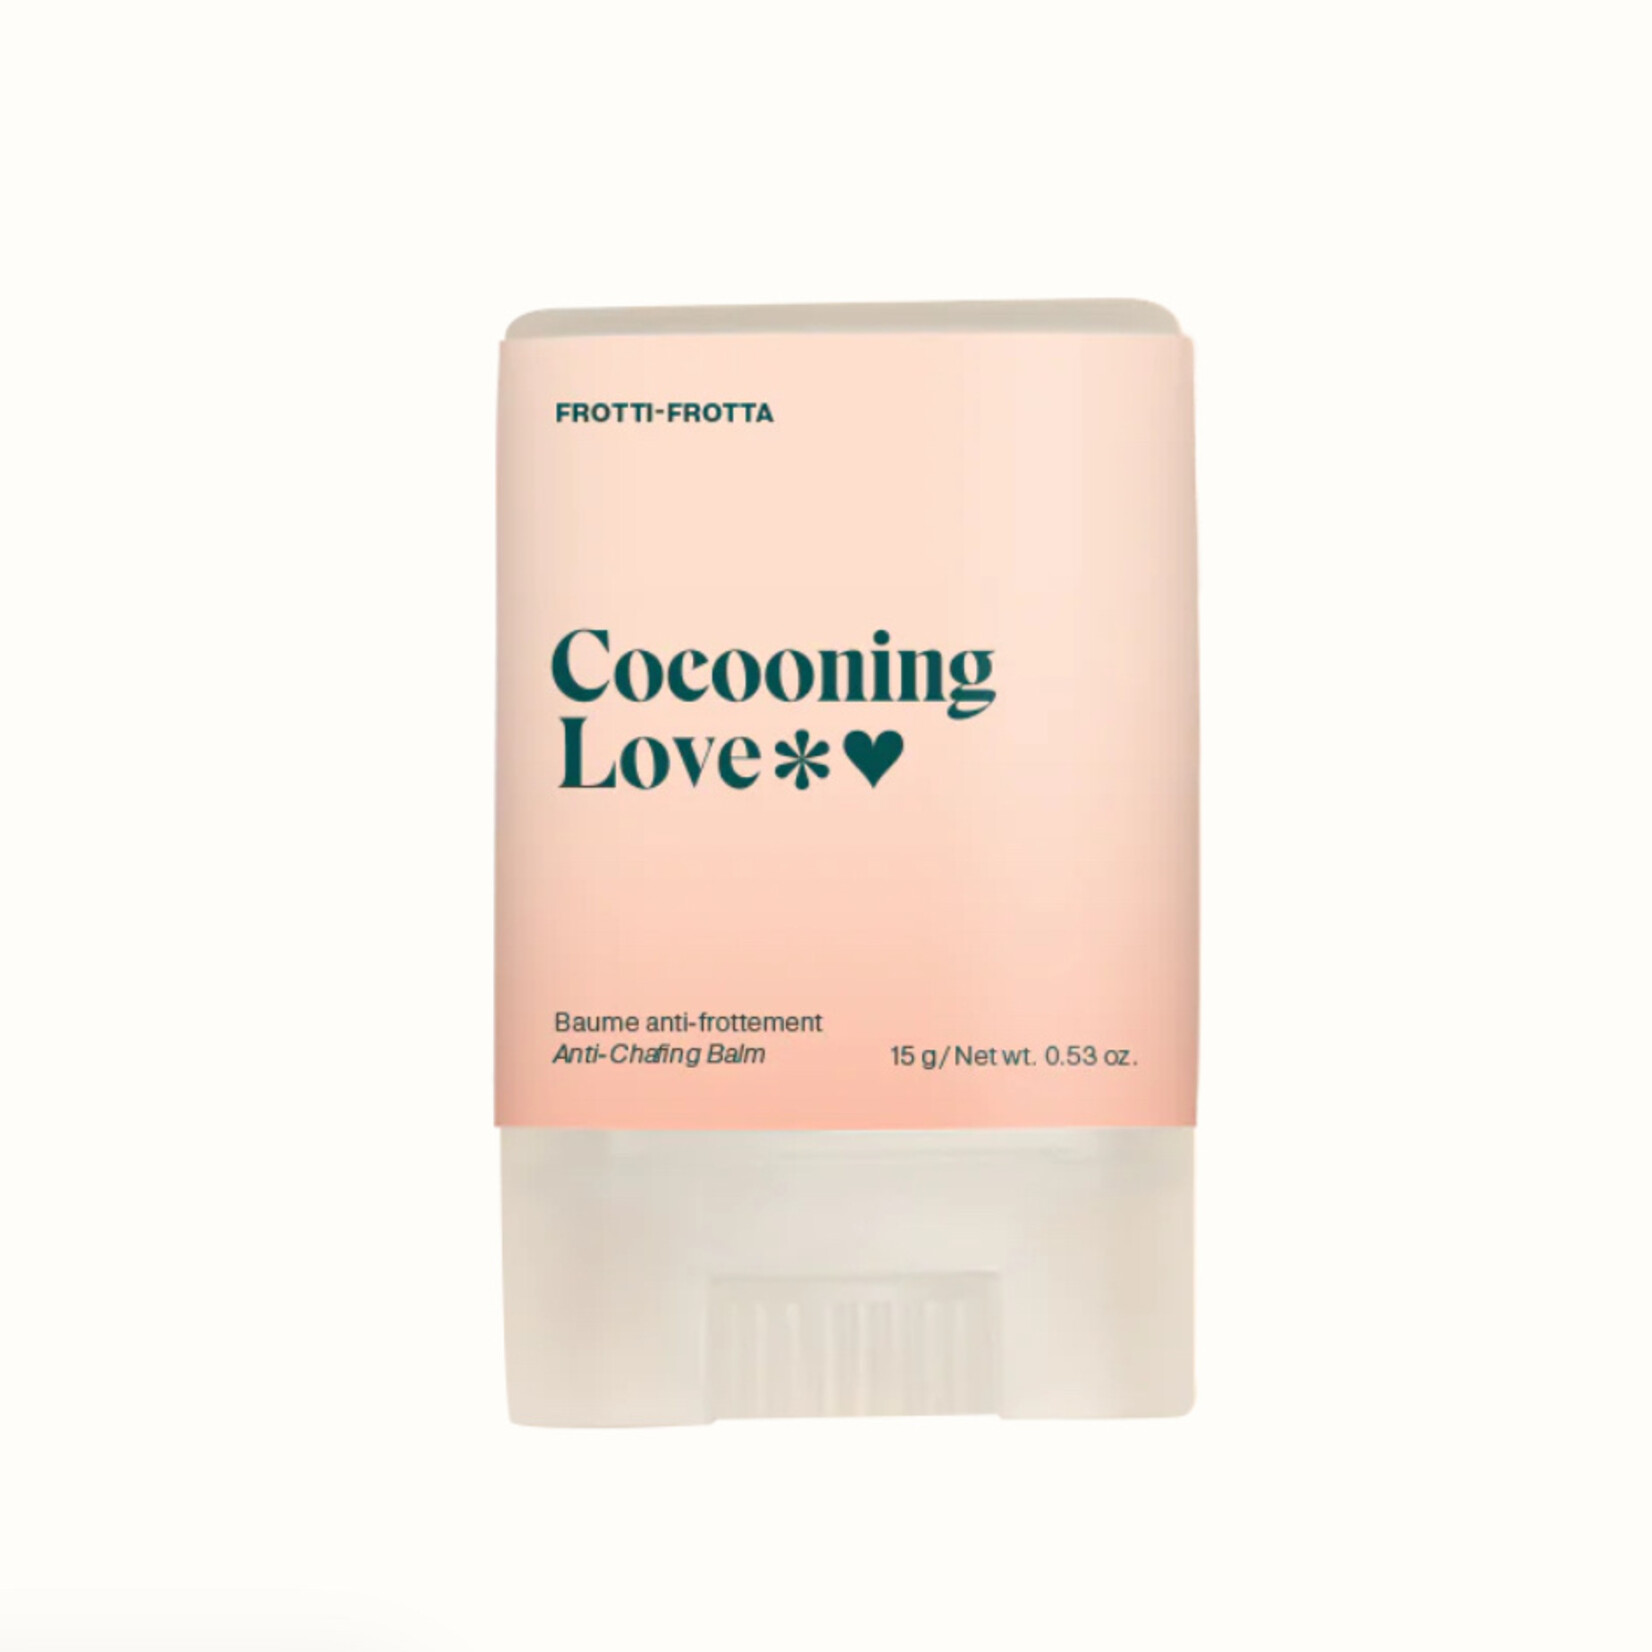 Cocooning Love Baume Antifriction Frotti Frotta